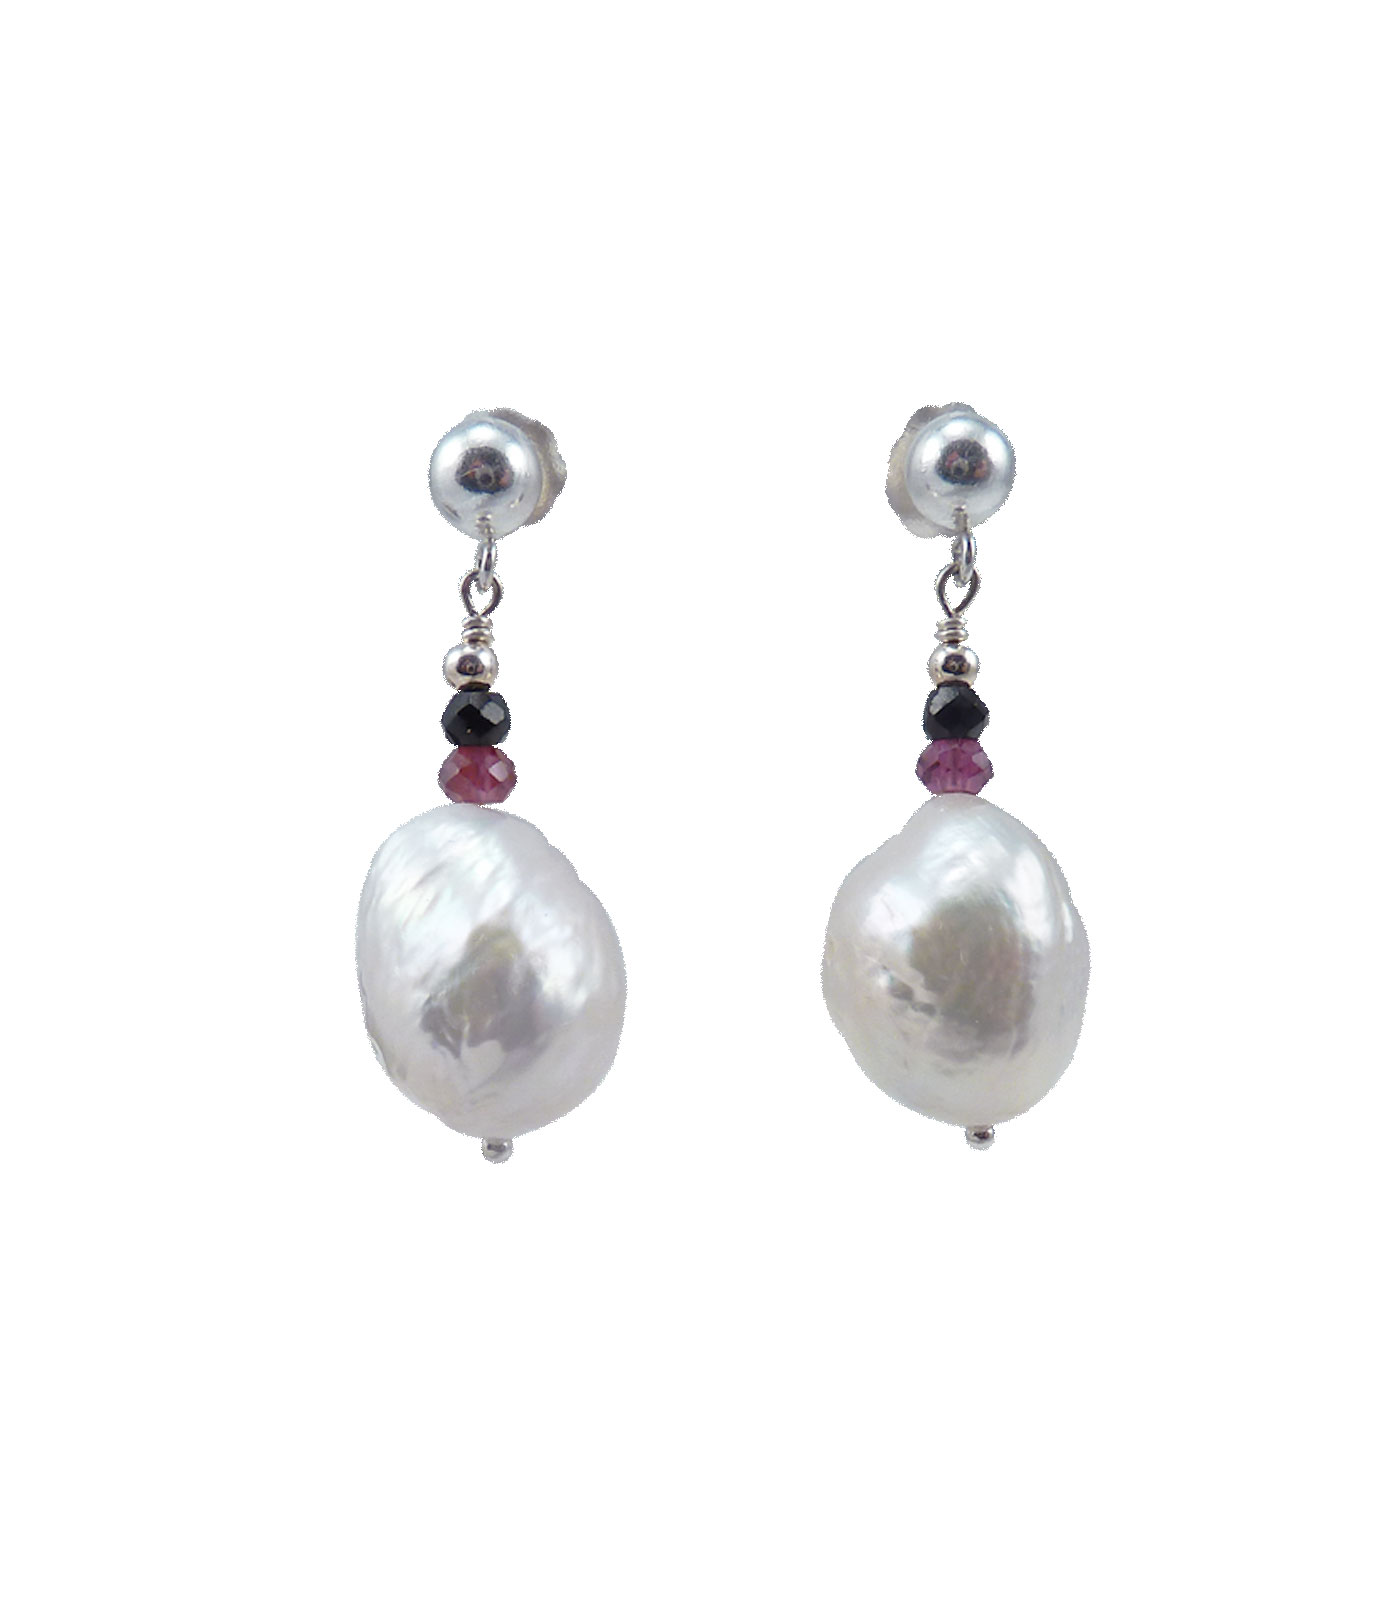 Pearl earrings white baroque pearls, colored gems. Modern pearl jewelry